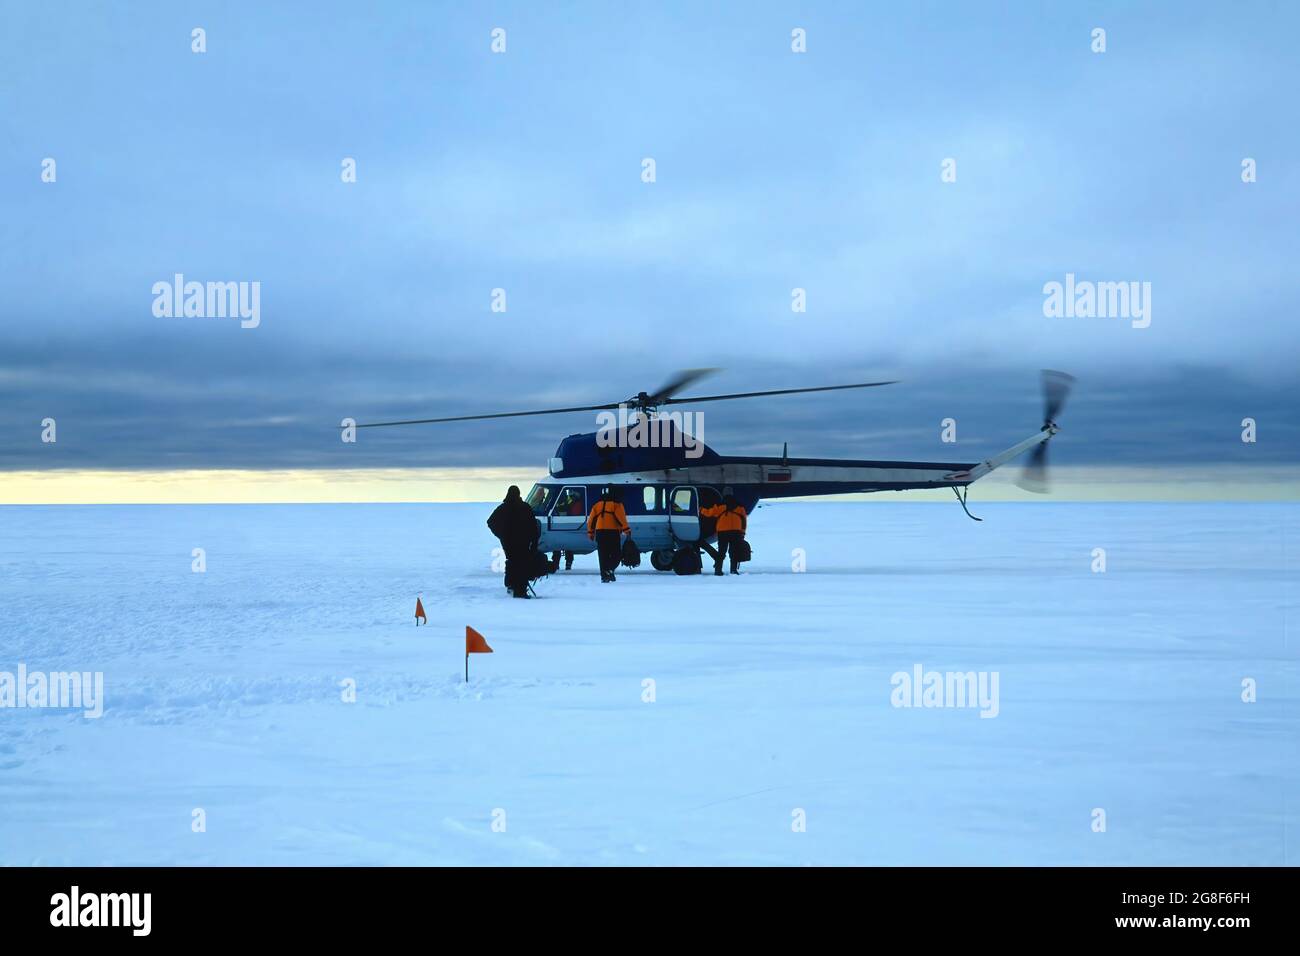 Helicopter loading people on the Ice floe, Drescher Inlet Iceport, Queen Maud Land Coast, Weddell Sea, Antarctica Stock Photo